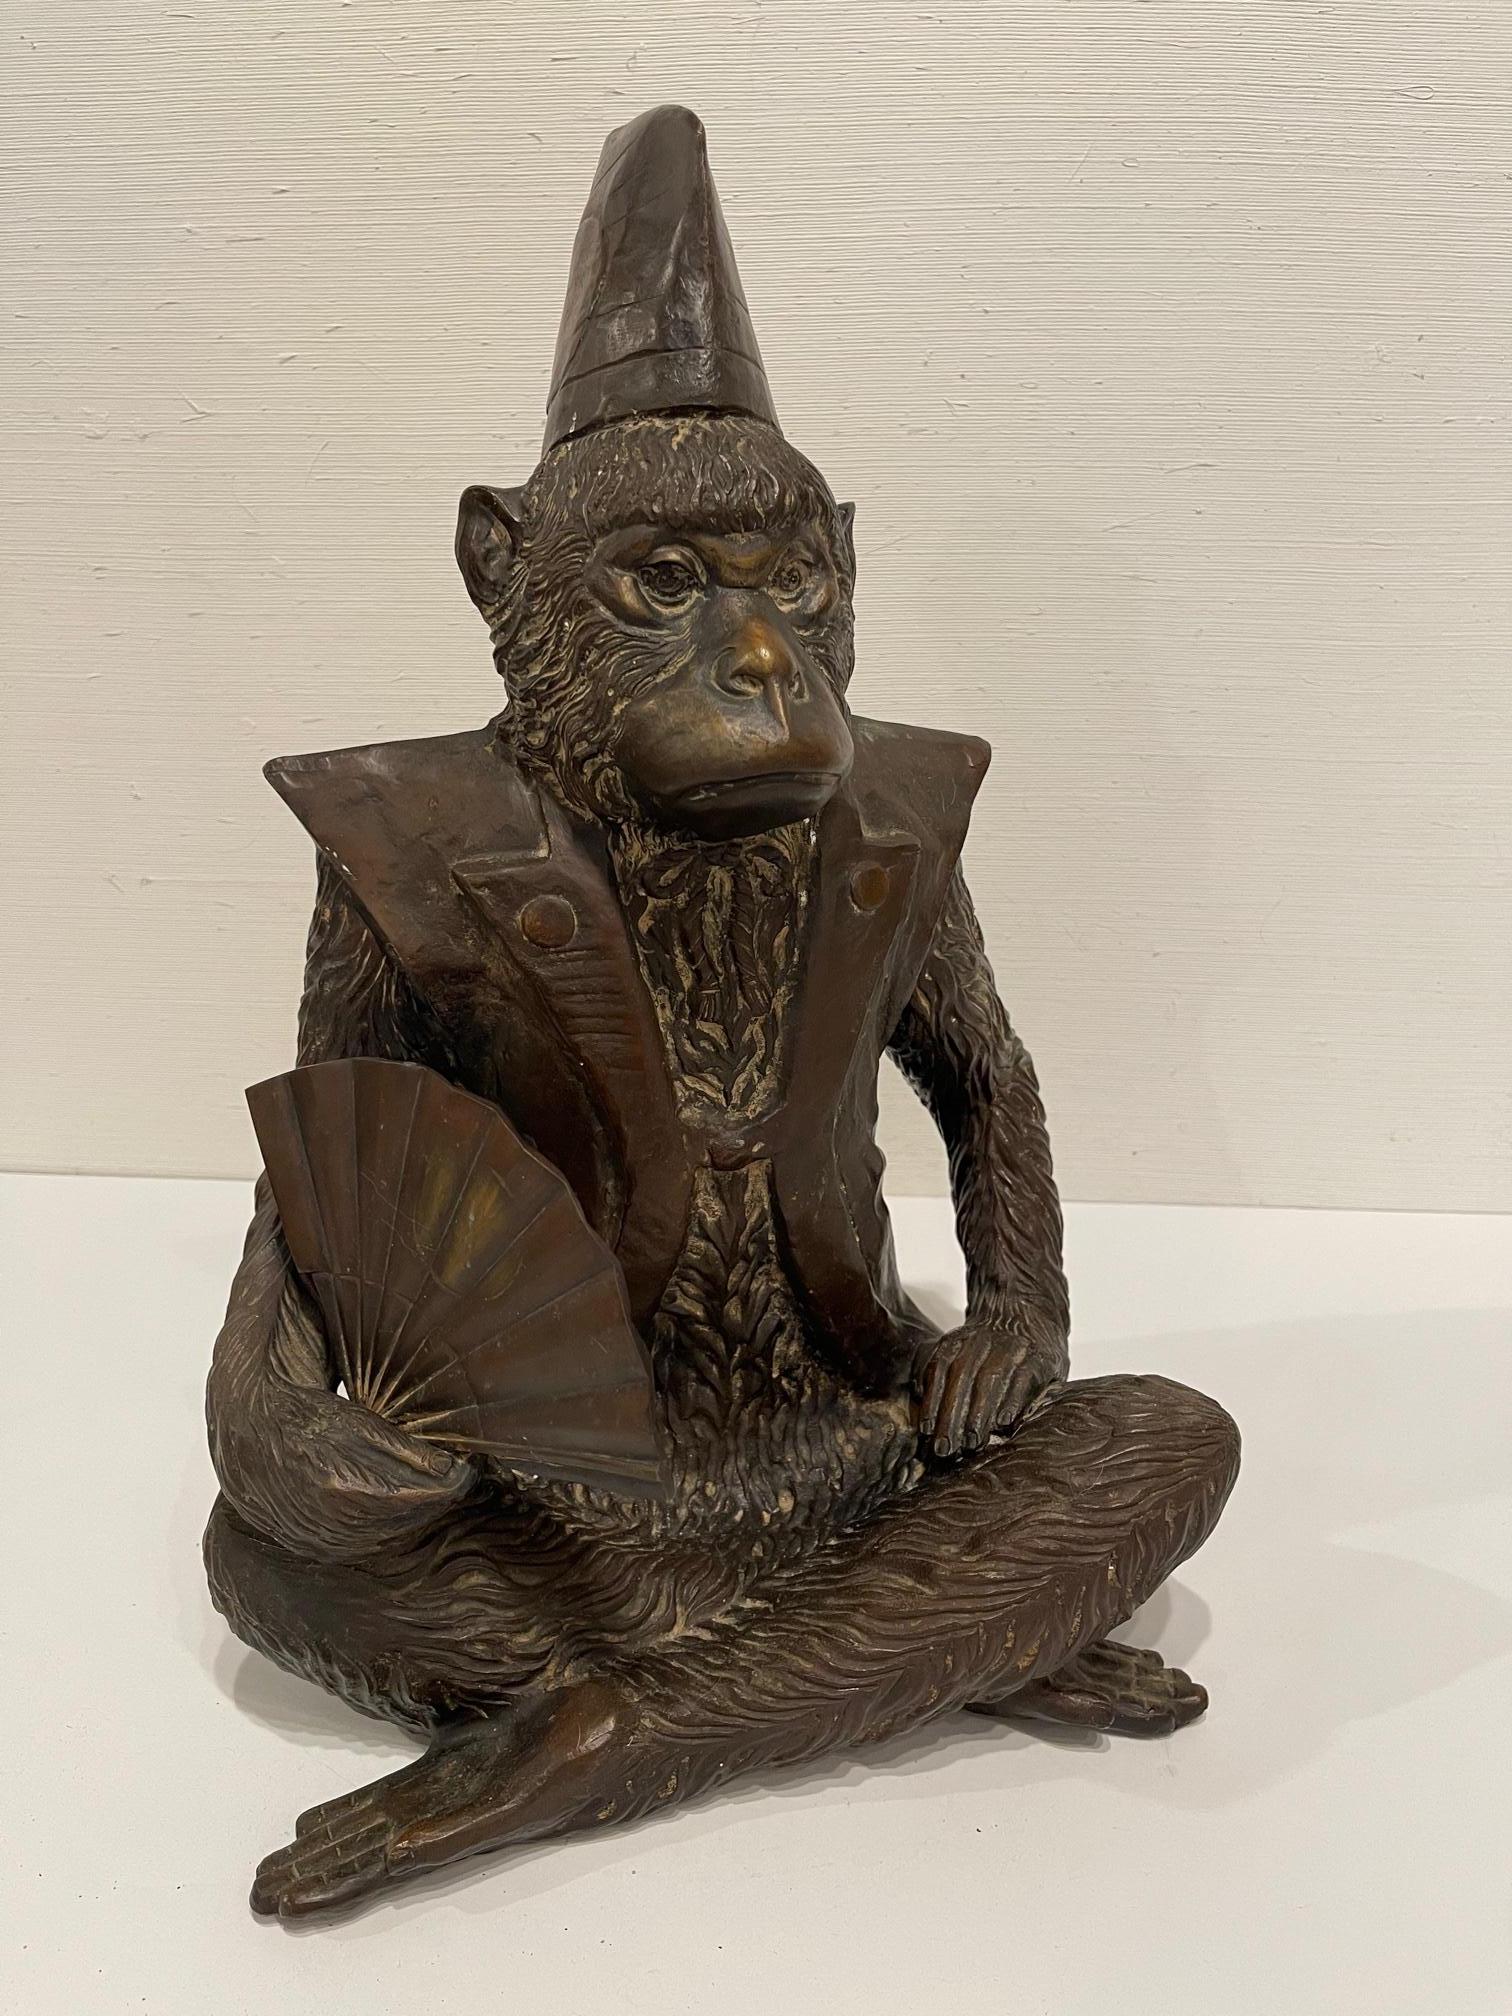 Bronze monkey Emperor holding a fan, 20th century. Originally purchased at Gumps.
 